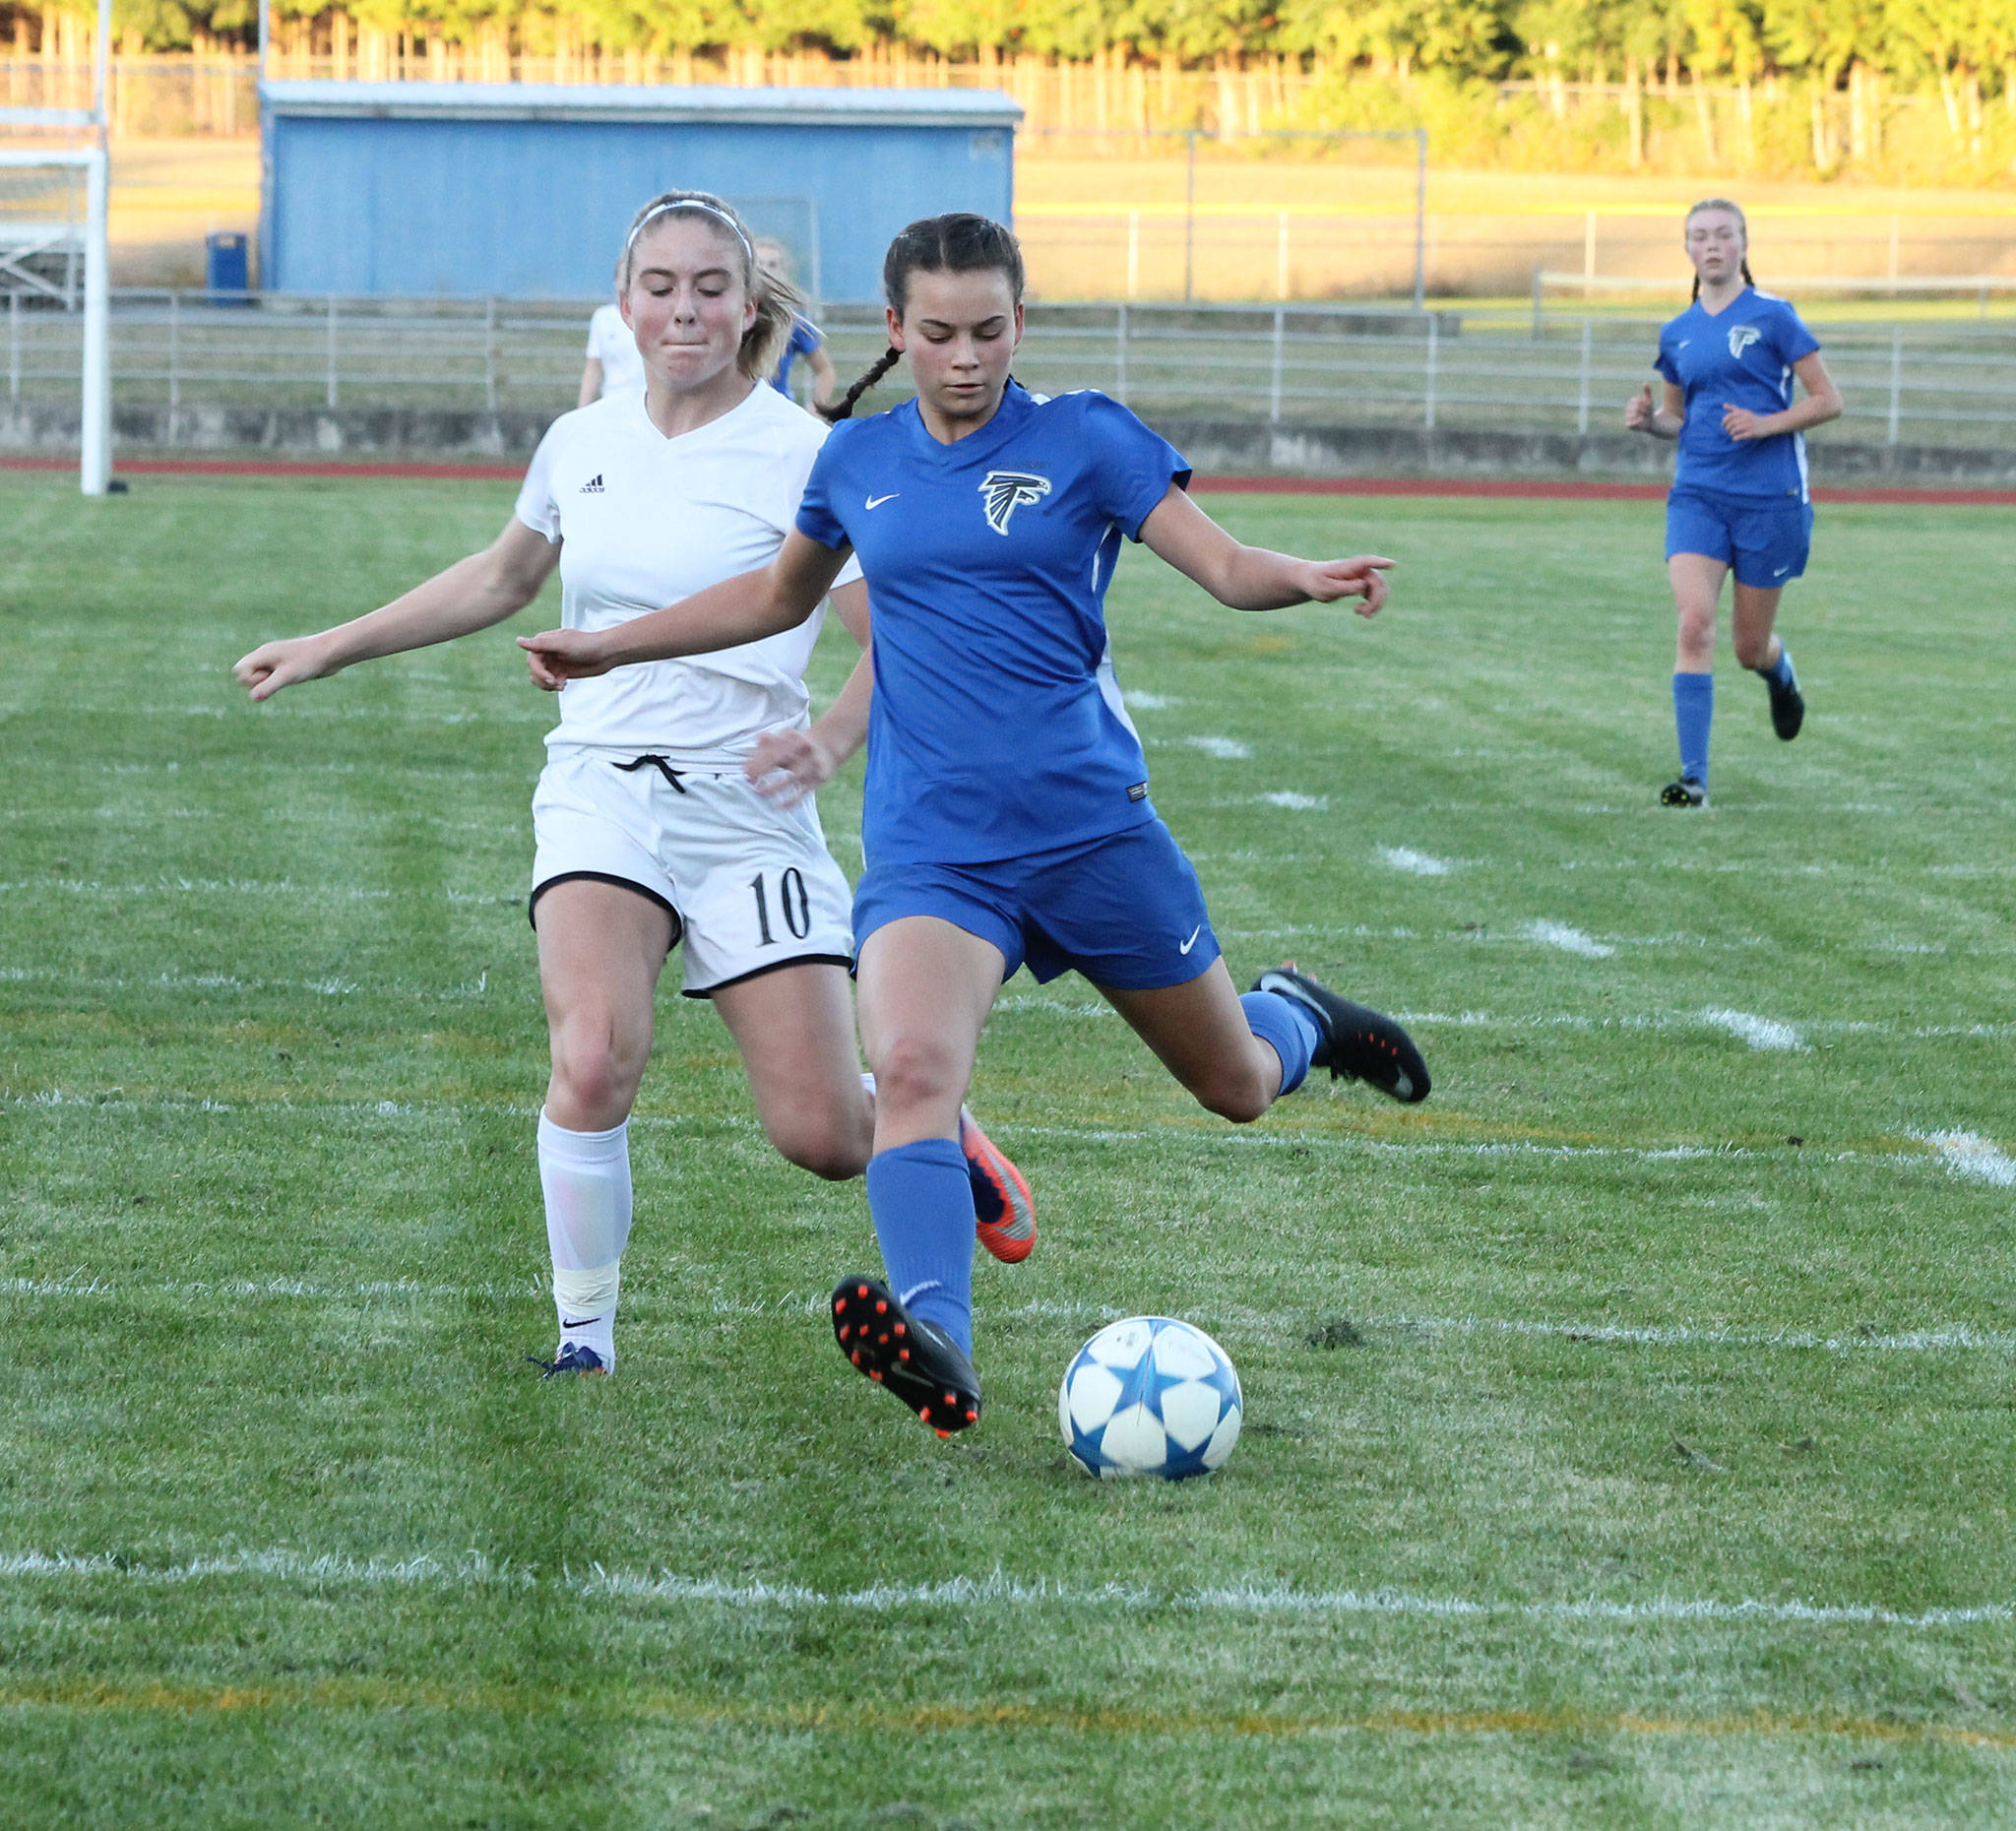 Alison Papritz scores a goal on this kick against Coupeville Tuesday.(Photo by Jim Waller/Whidbey News-Times)